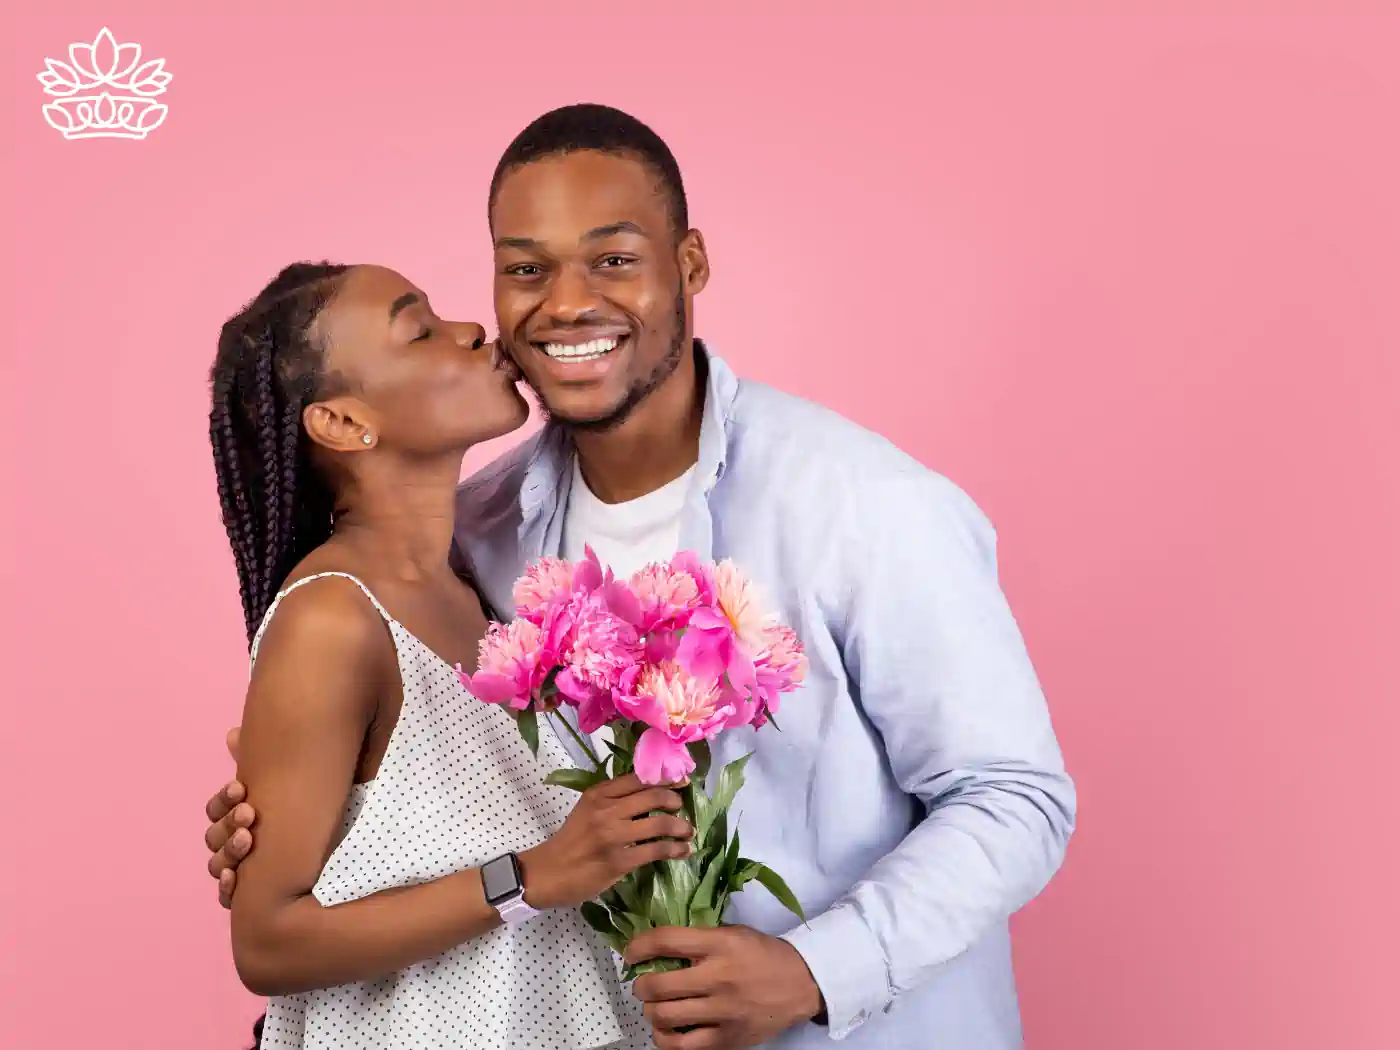 Image of a smiling woman kissing a man's cheek while he holds a pink flower bouquet against a pink background. Fabulous Flowers and Gifts - Luxury Flower Bouquets.